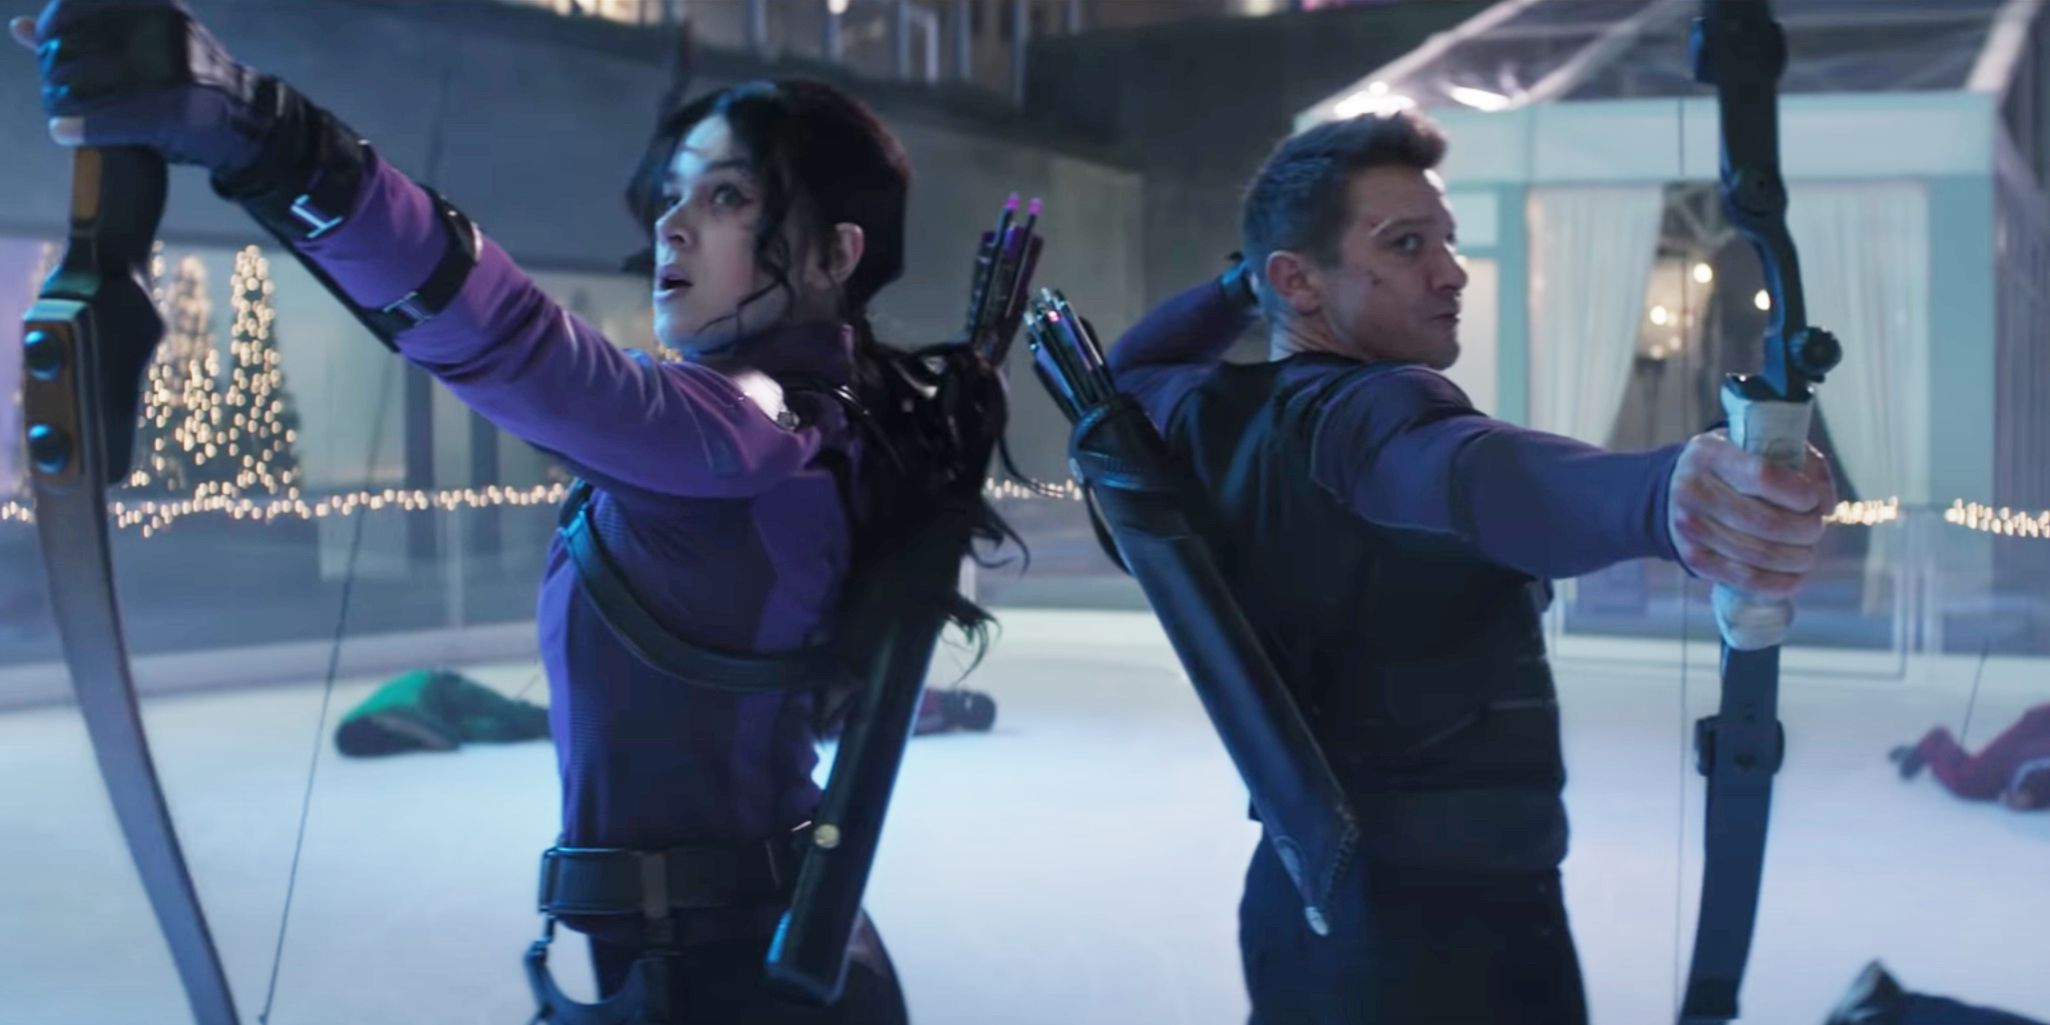 Clint Barton &amp; Kate Bishop aim their bows in an ice rink in Hawkeye.